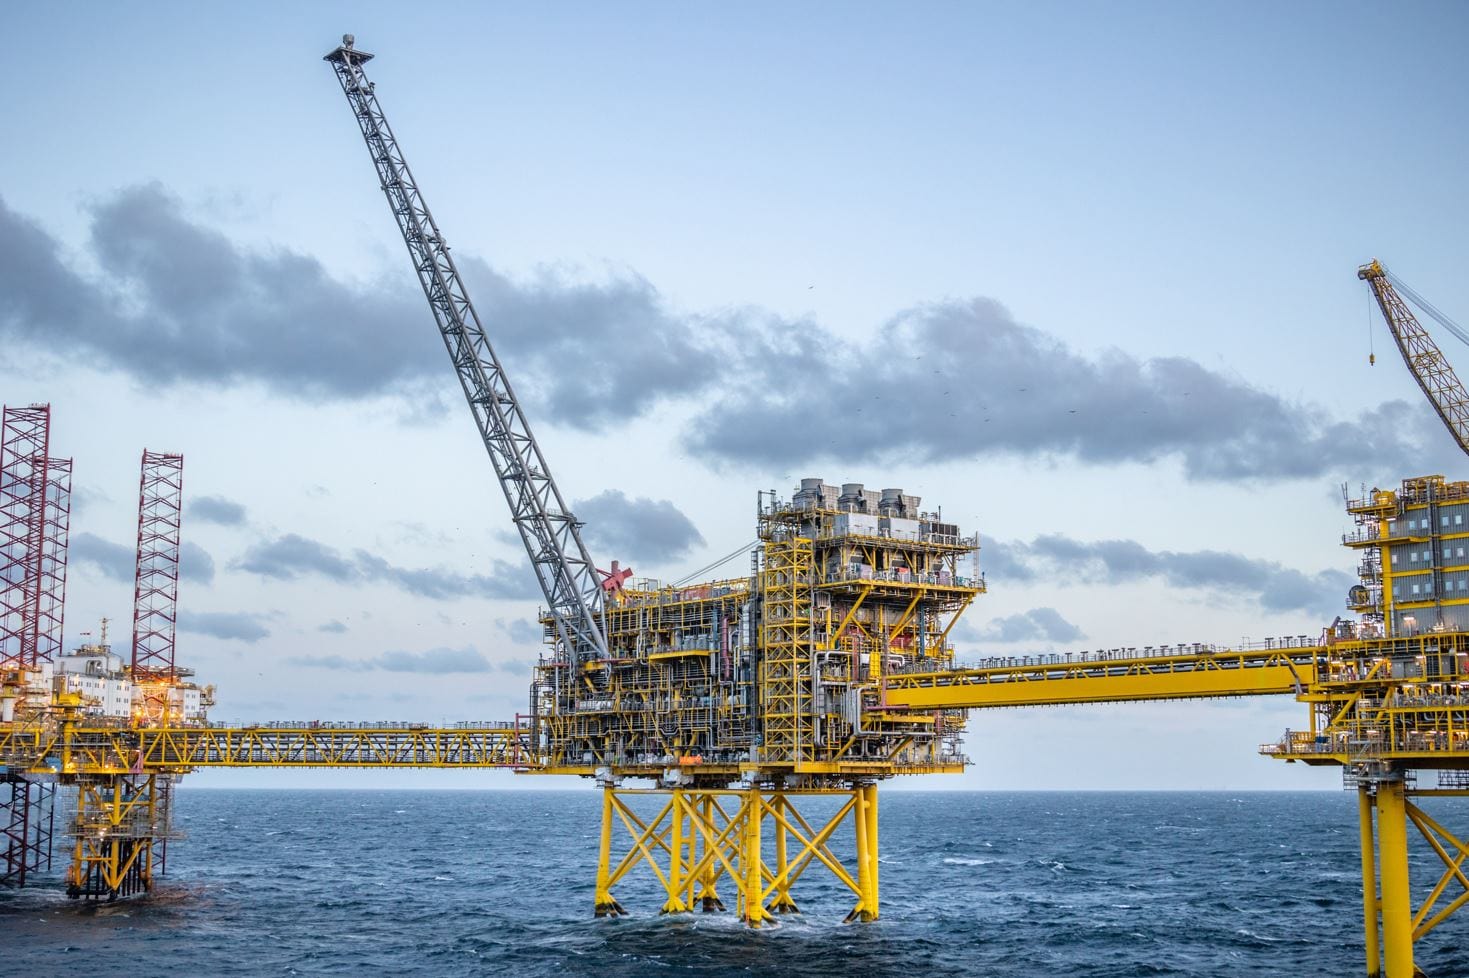 Start-up of Denmark’s largest natural gas field expected early next year